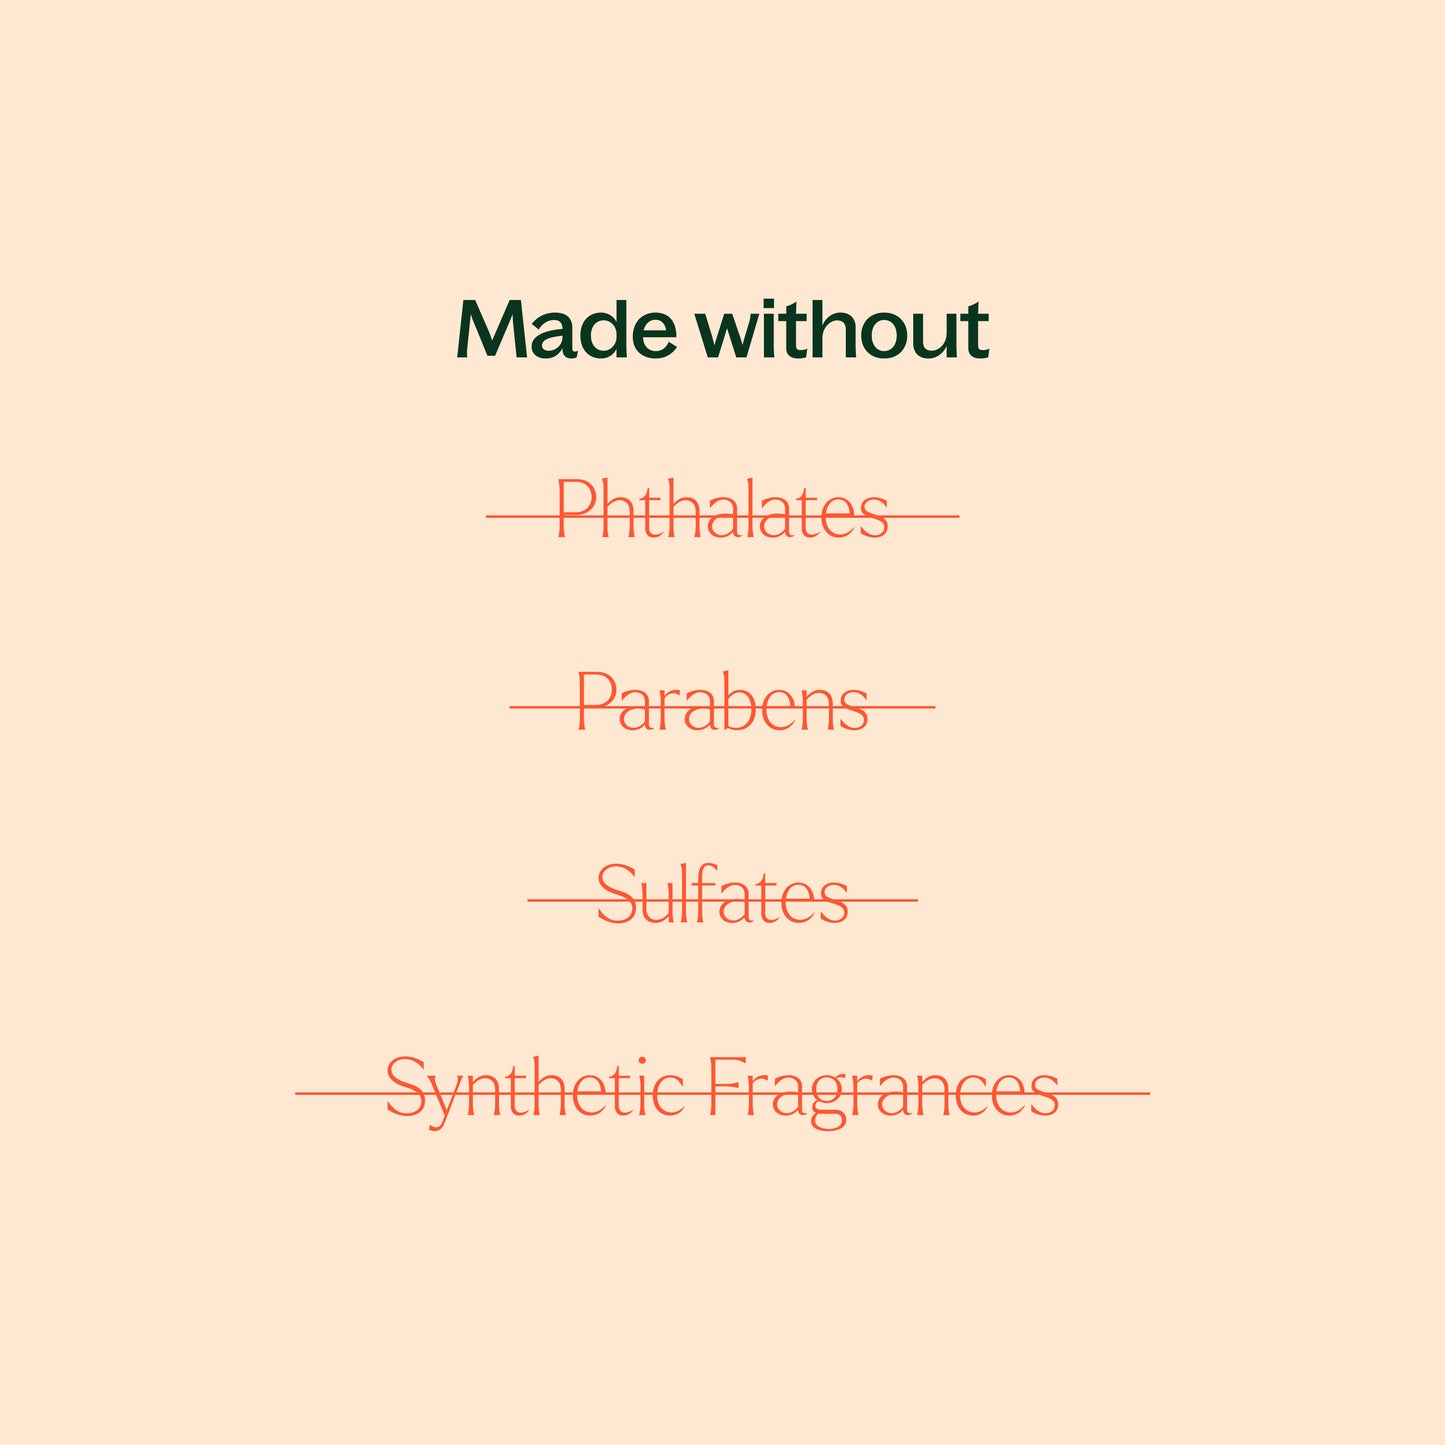 made without additives, phthalates, sulfates, synthetic fragrances, parabens